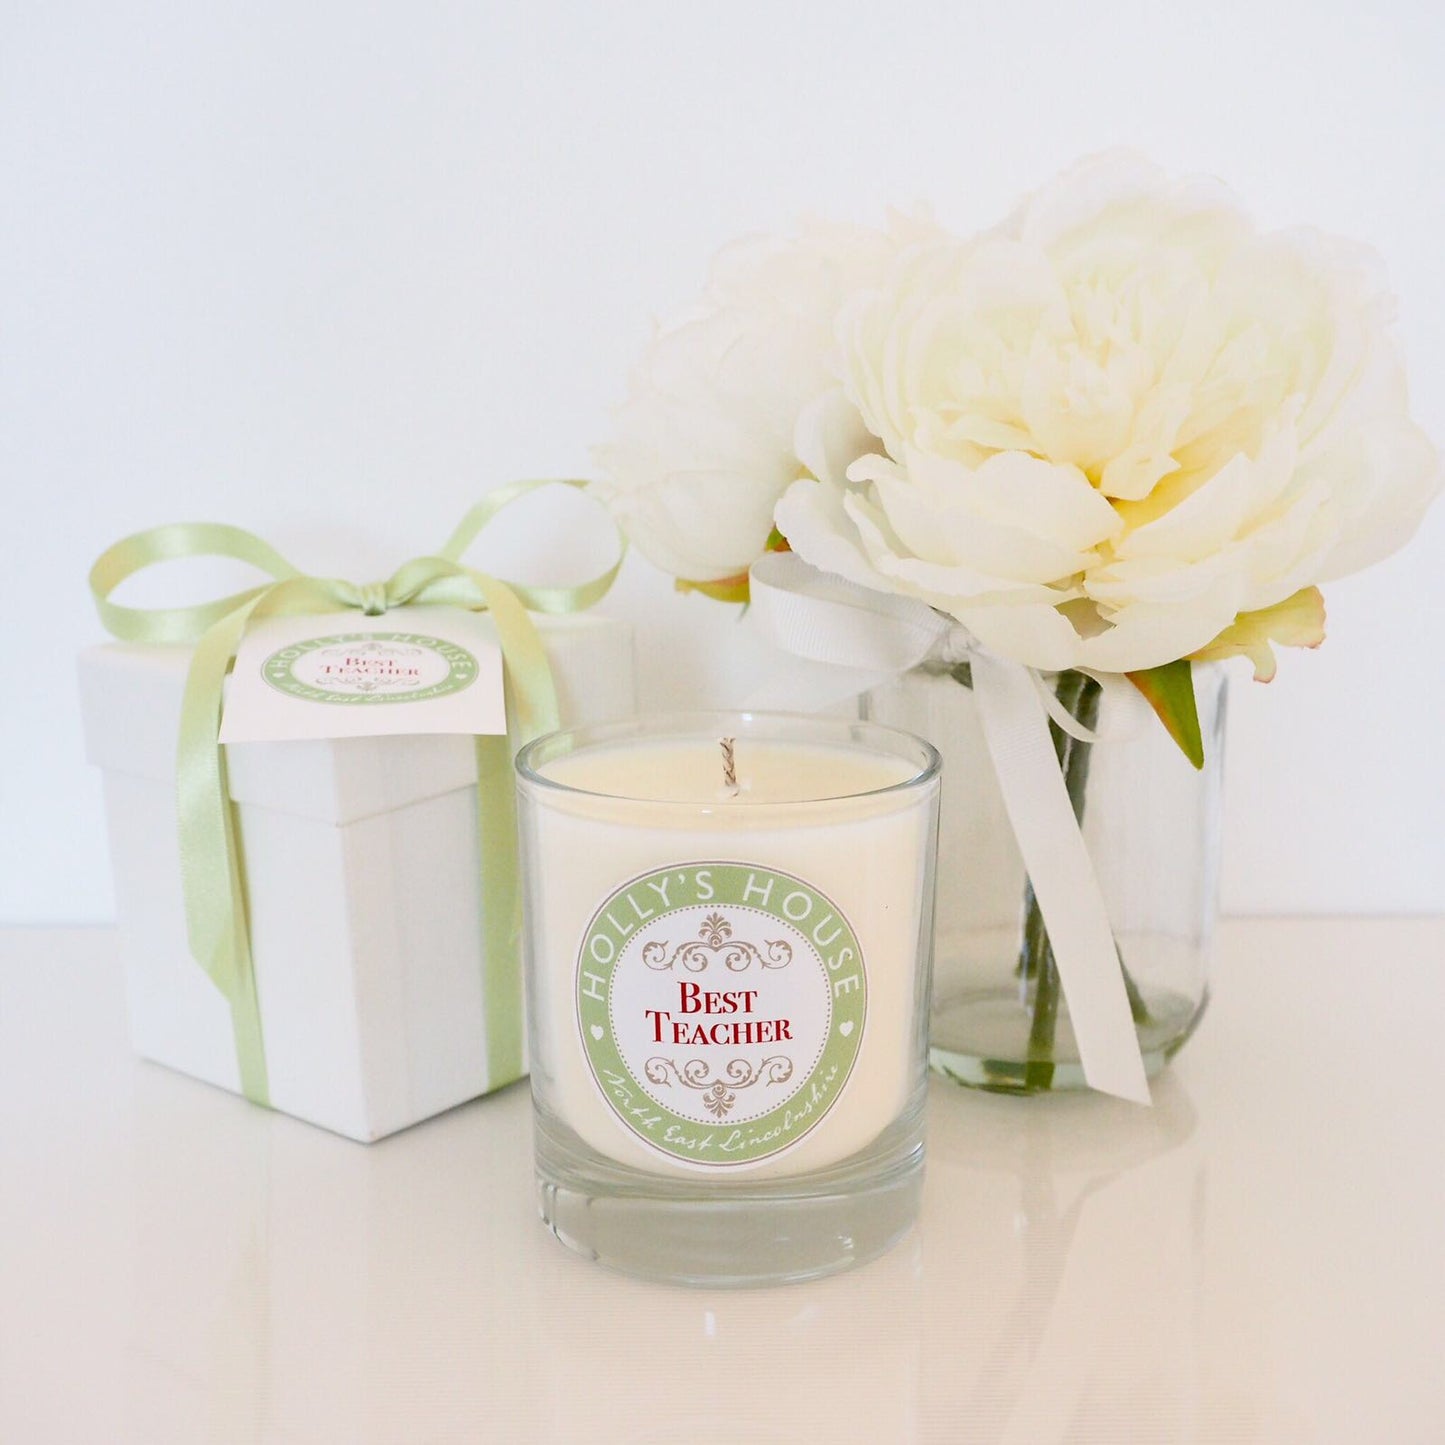 Fizz Bomb Luxury Scented Candle